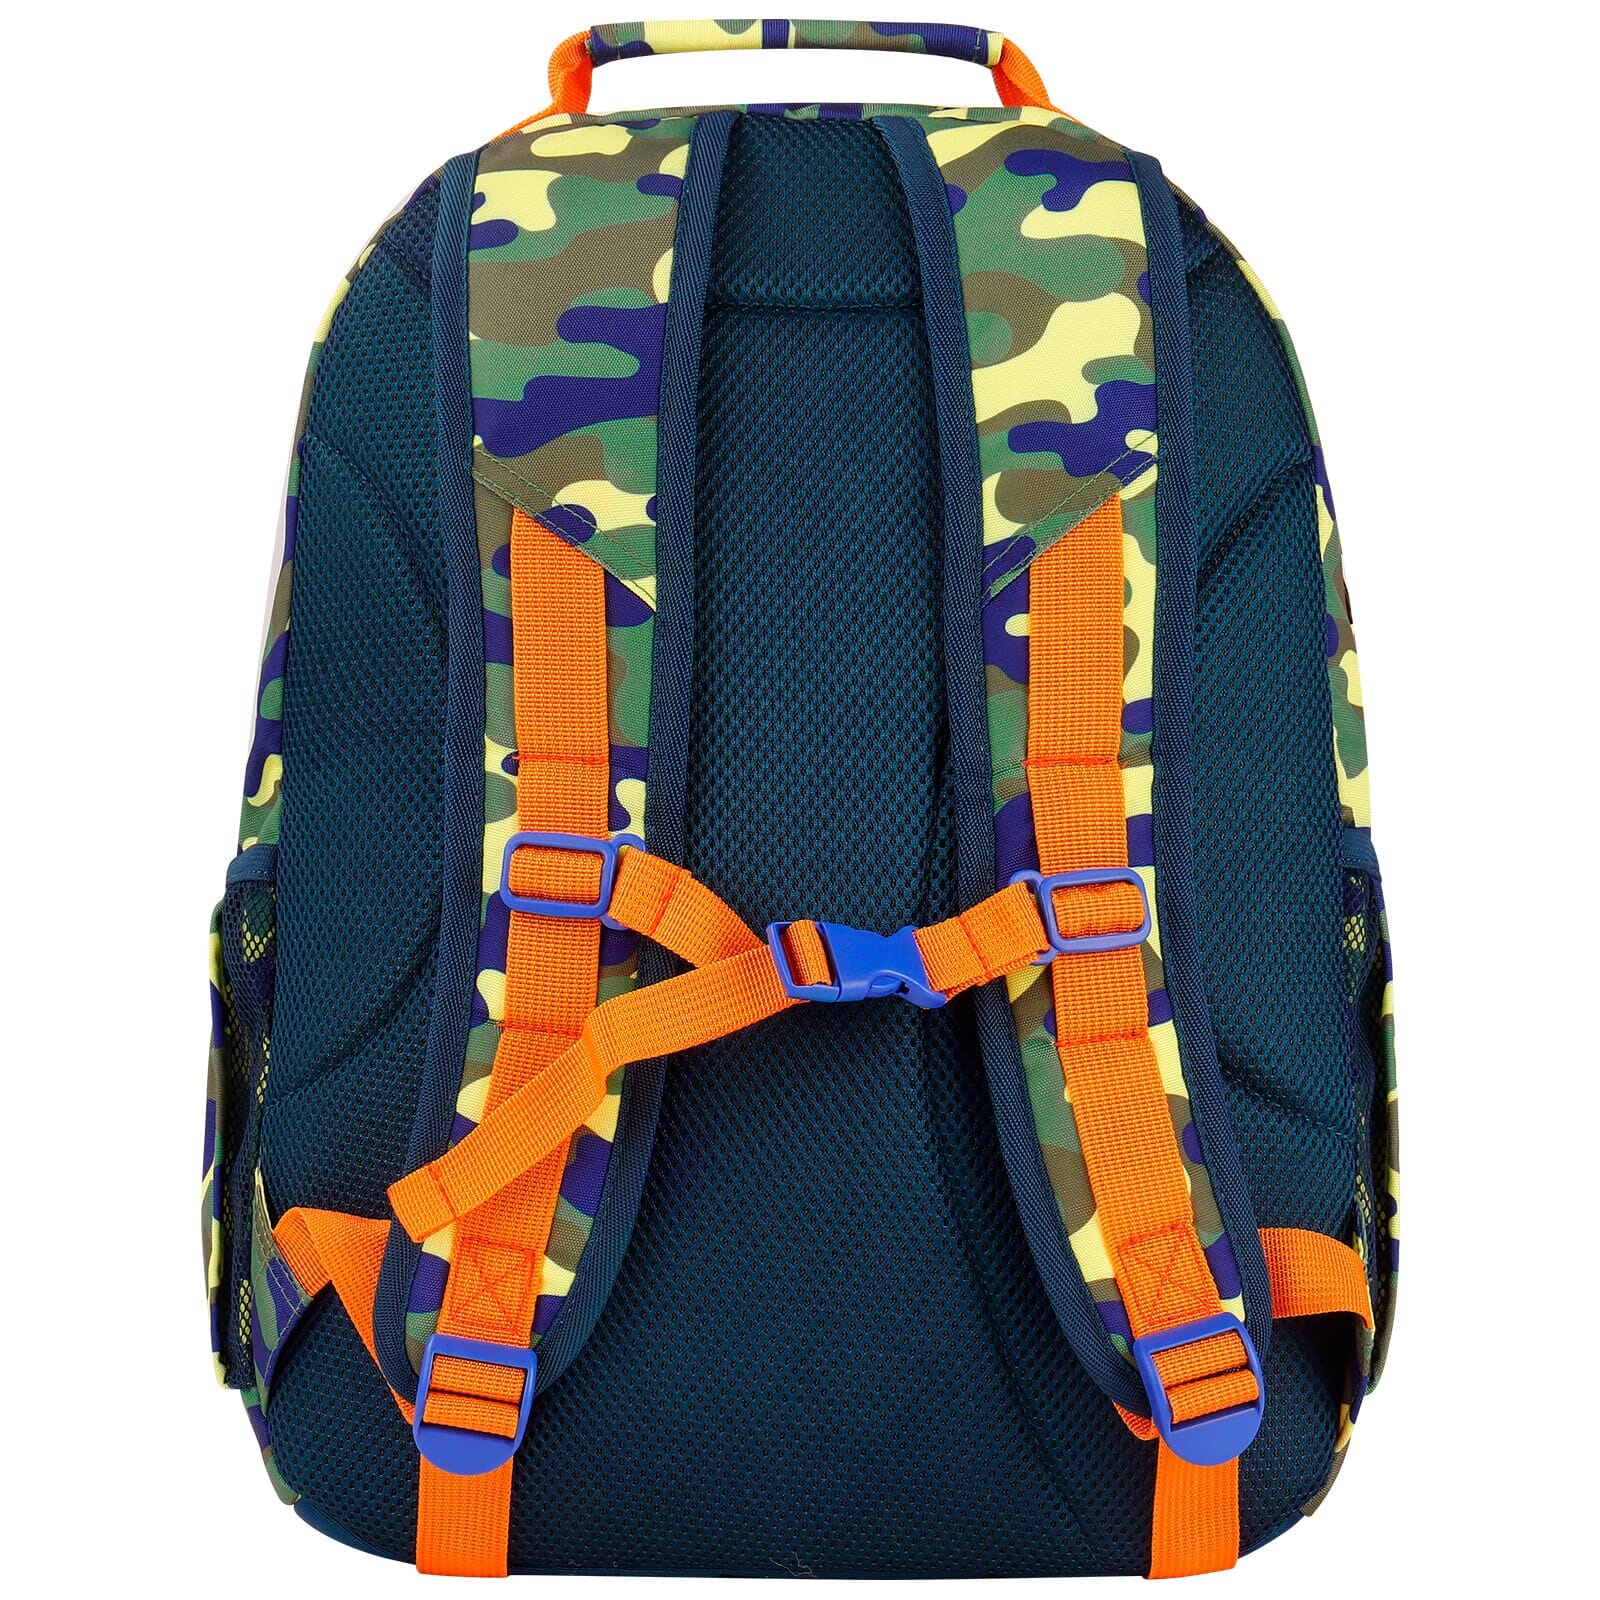 Choco Mocha Camo Backpack for Boys Backpacks for Elementary School Backpack for Kids Backpack Boys 17 inch Backpack for Boys Camouflage Bookbag with Chest Strap 5-7 6-8 School Bag 2nd 3rd Grade Yellow chocomochakids 